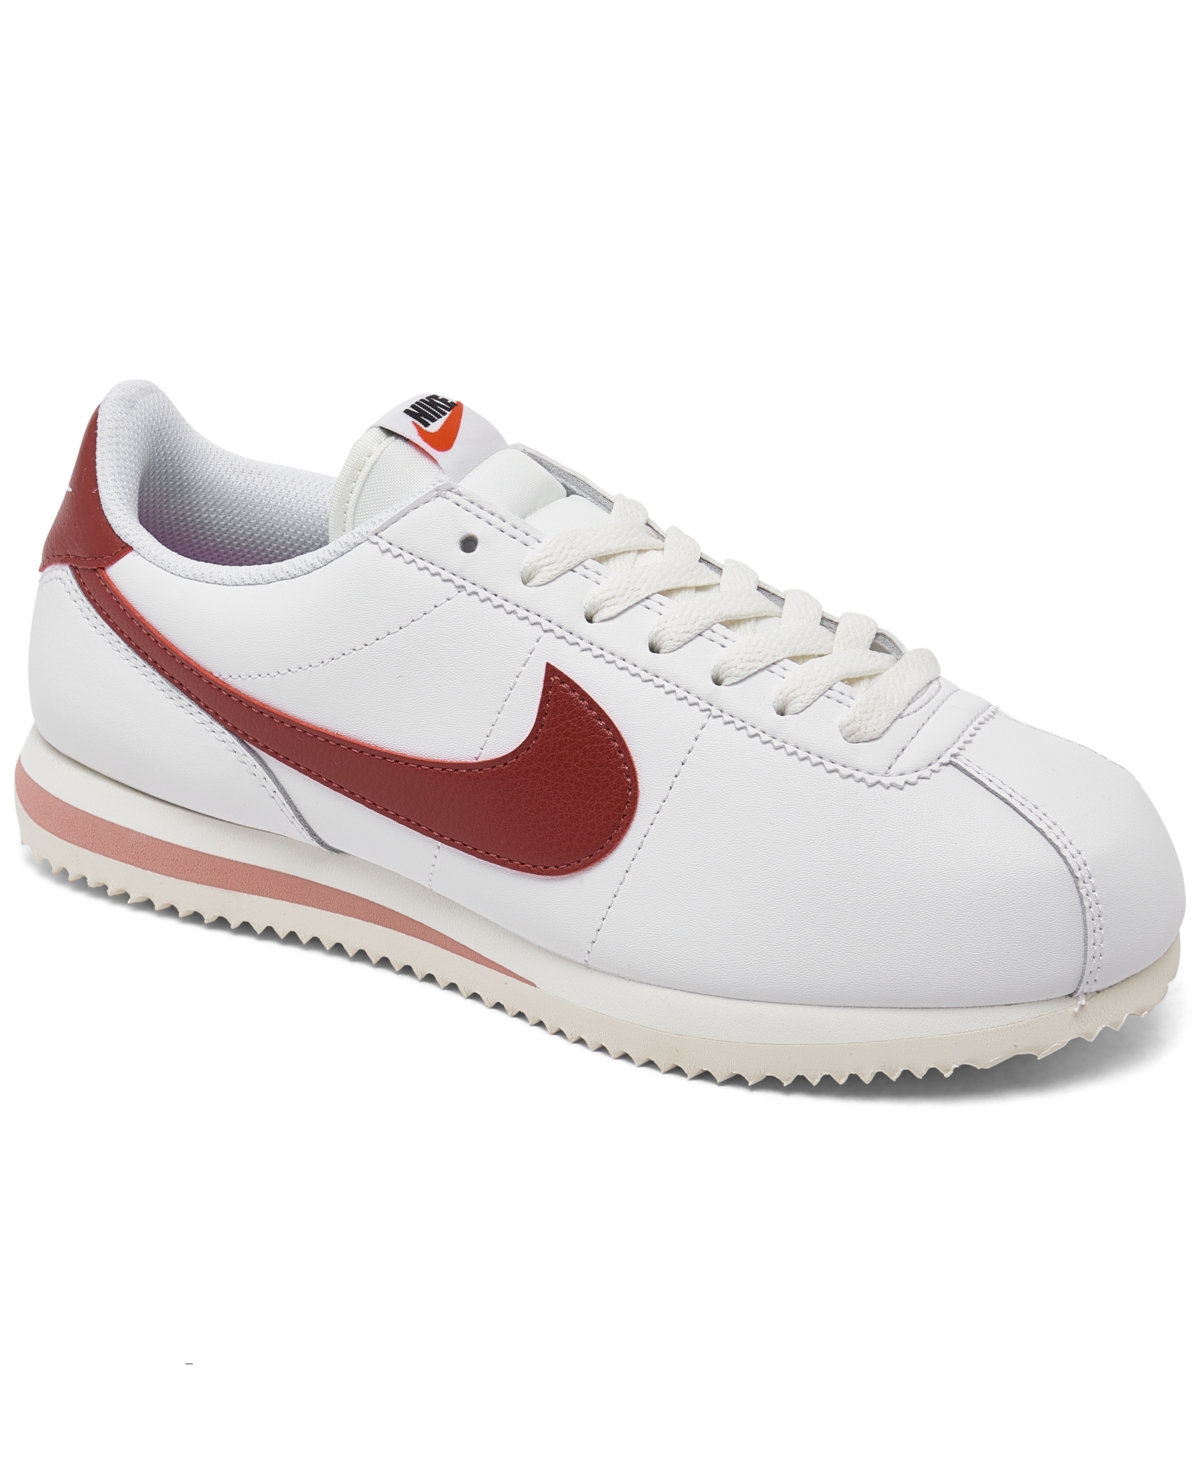 Women's Classic Cortez Leather Casual Sneakers from Finish Line - White, Cedar, Red Stardust